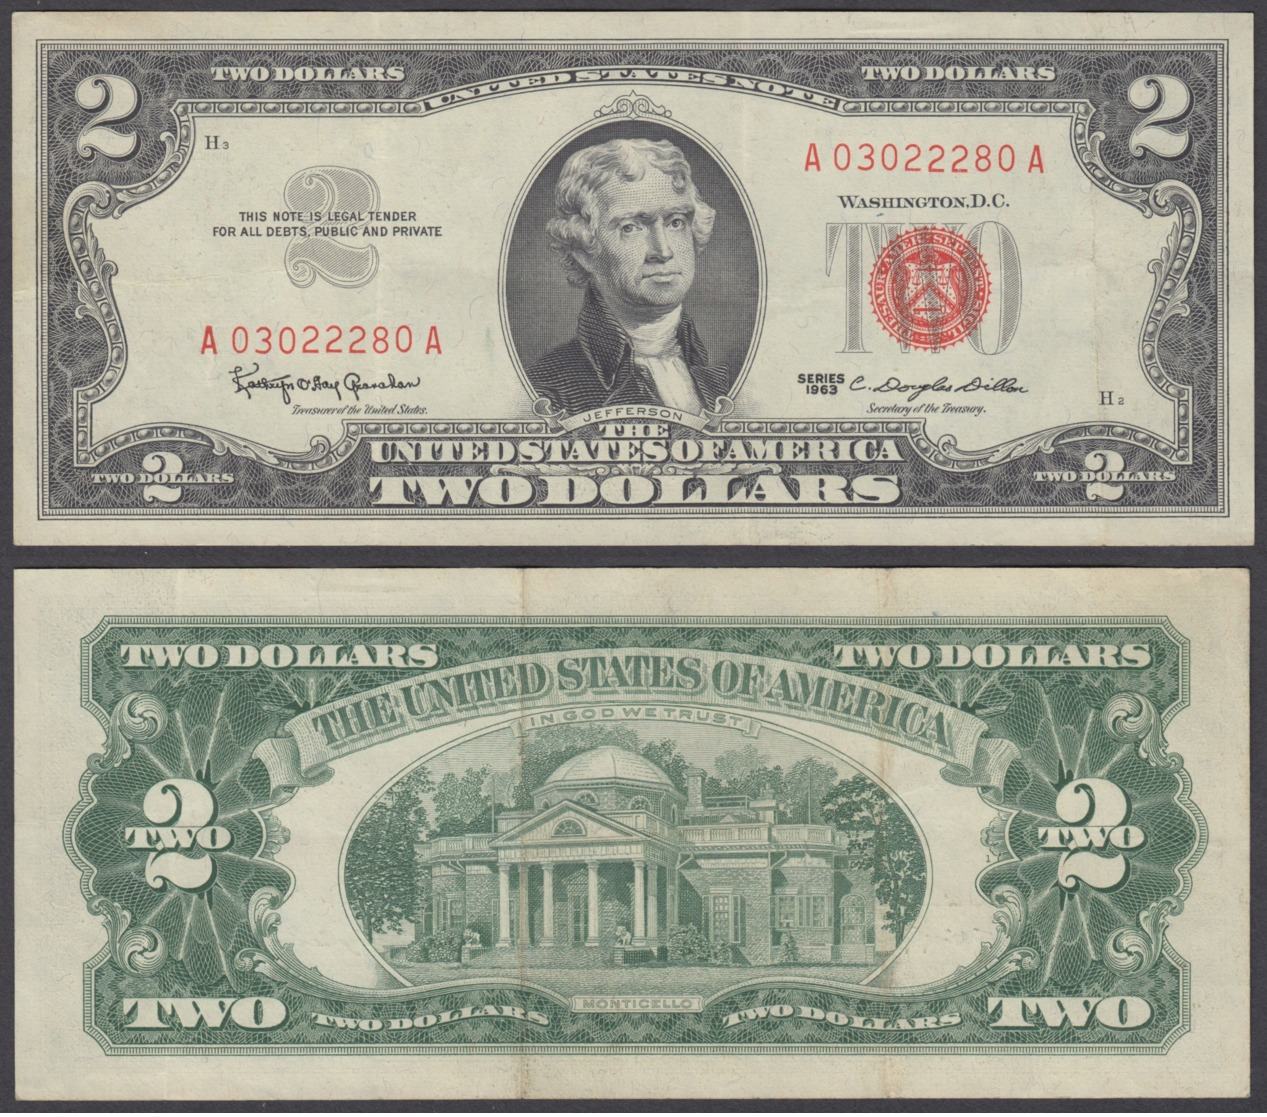 USA 2 Dollars 1963 Red Seal (VF+) Condition Banknote - United States Notes (1928-1953)